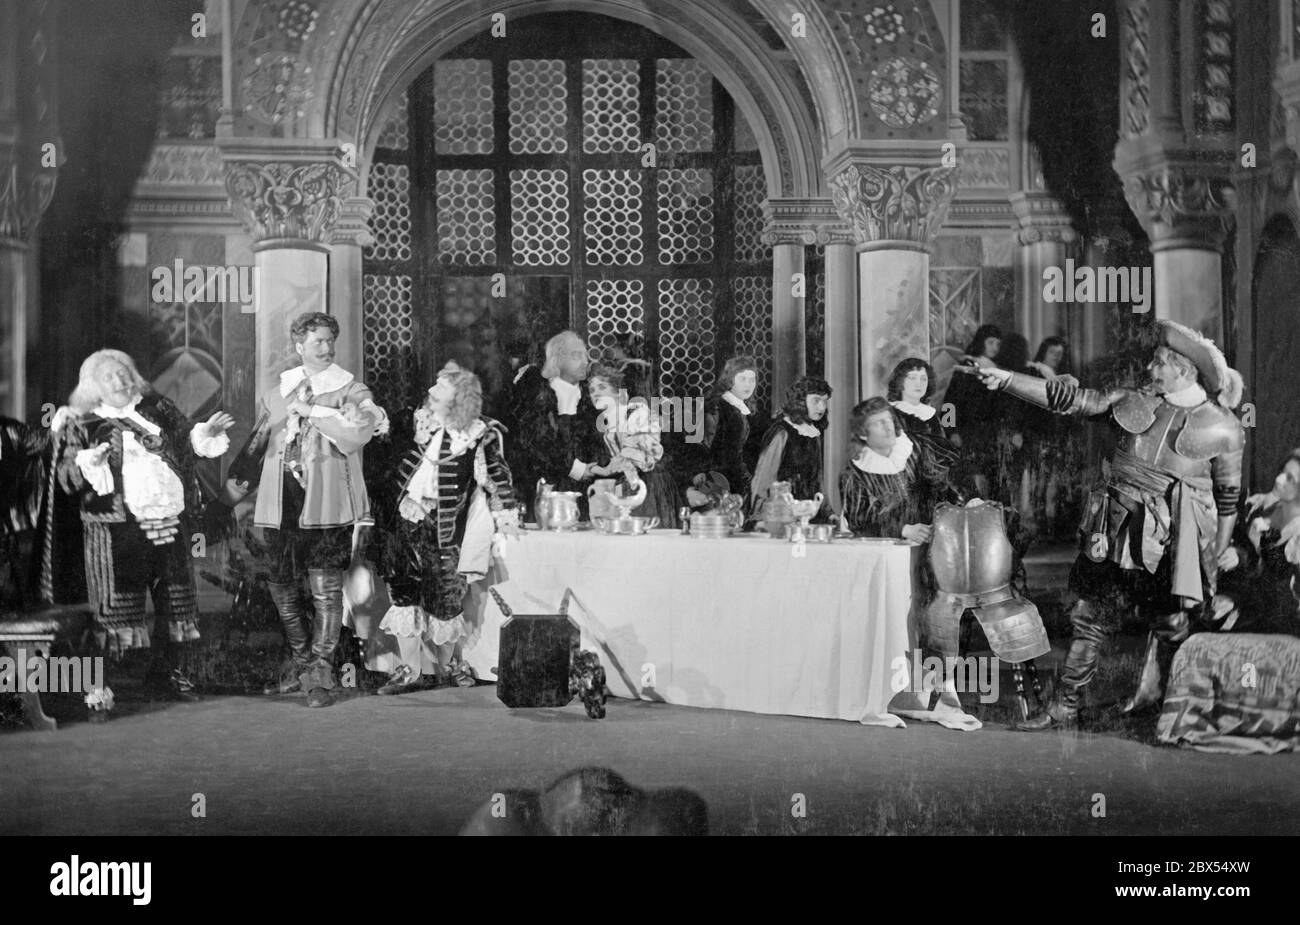 First performance of the drama 'Der Generaloberst' by Ernst von Wildenbruch at the Weimar Hoftheater on 14 April: The main scene of Act IV. From the left: Ruppa (G. Heltzig) and King Friedrich (K. Grube). The couple behind the table: Jessenius (E. Wilhelmi) and Genoveva (Fraeulein Scholz). The man pointing is Generalfeldoberst (K. Weiser) and to the right of him sits Elisabeth (Fraeulein Schiffel). Stock Photo